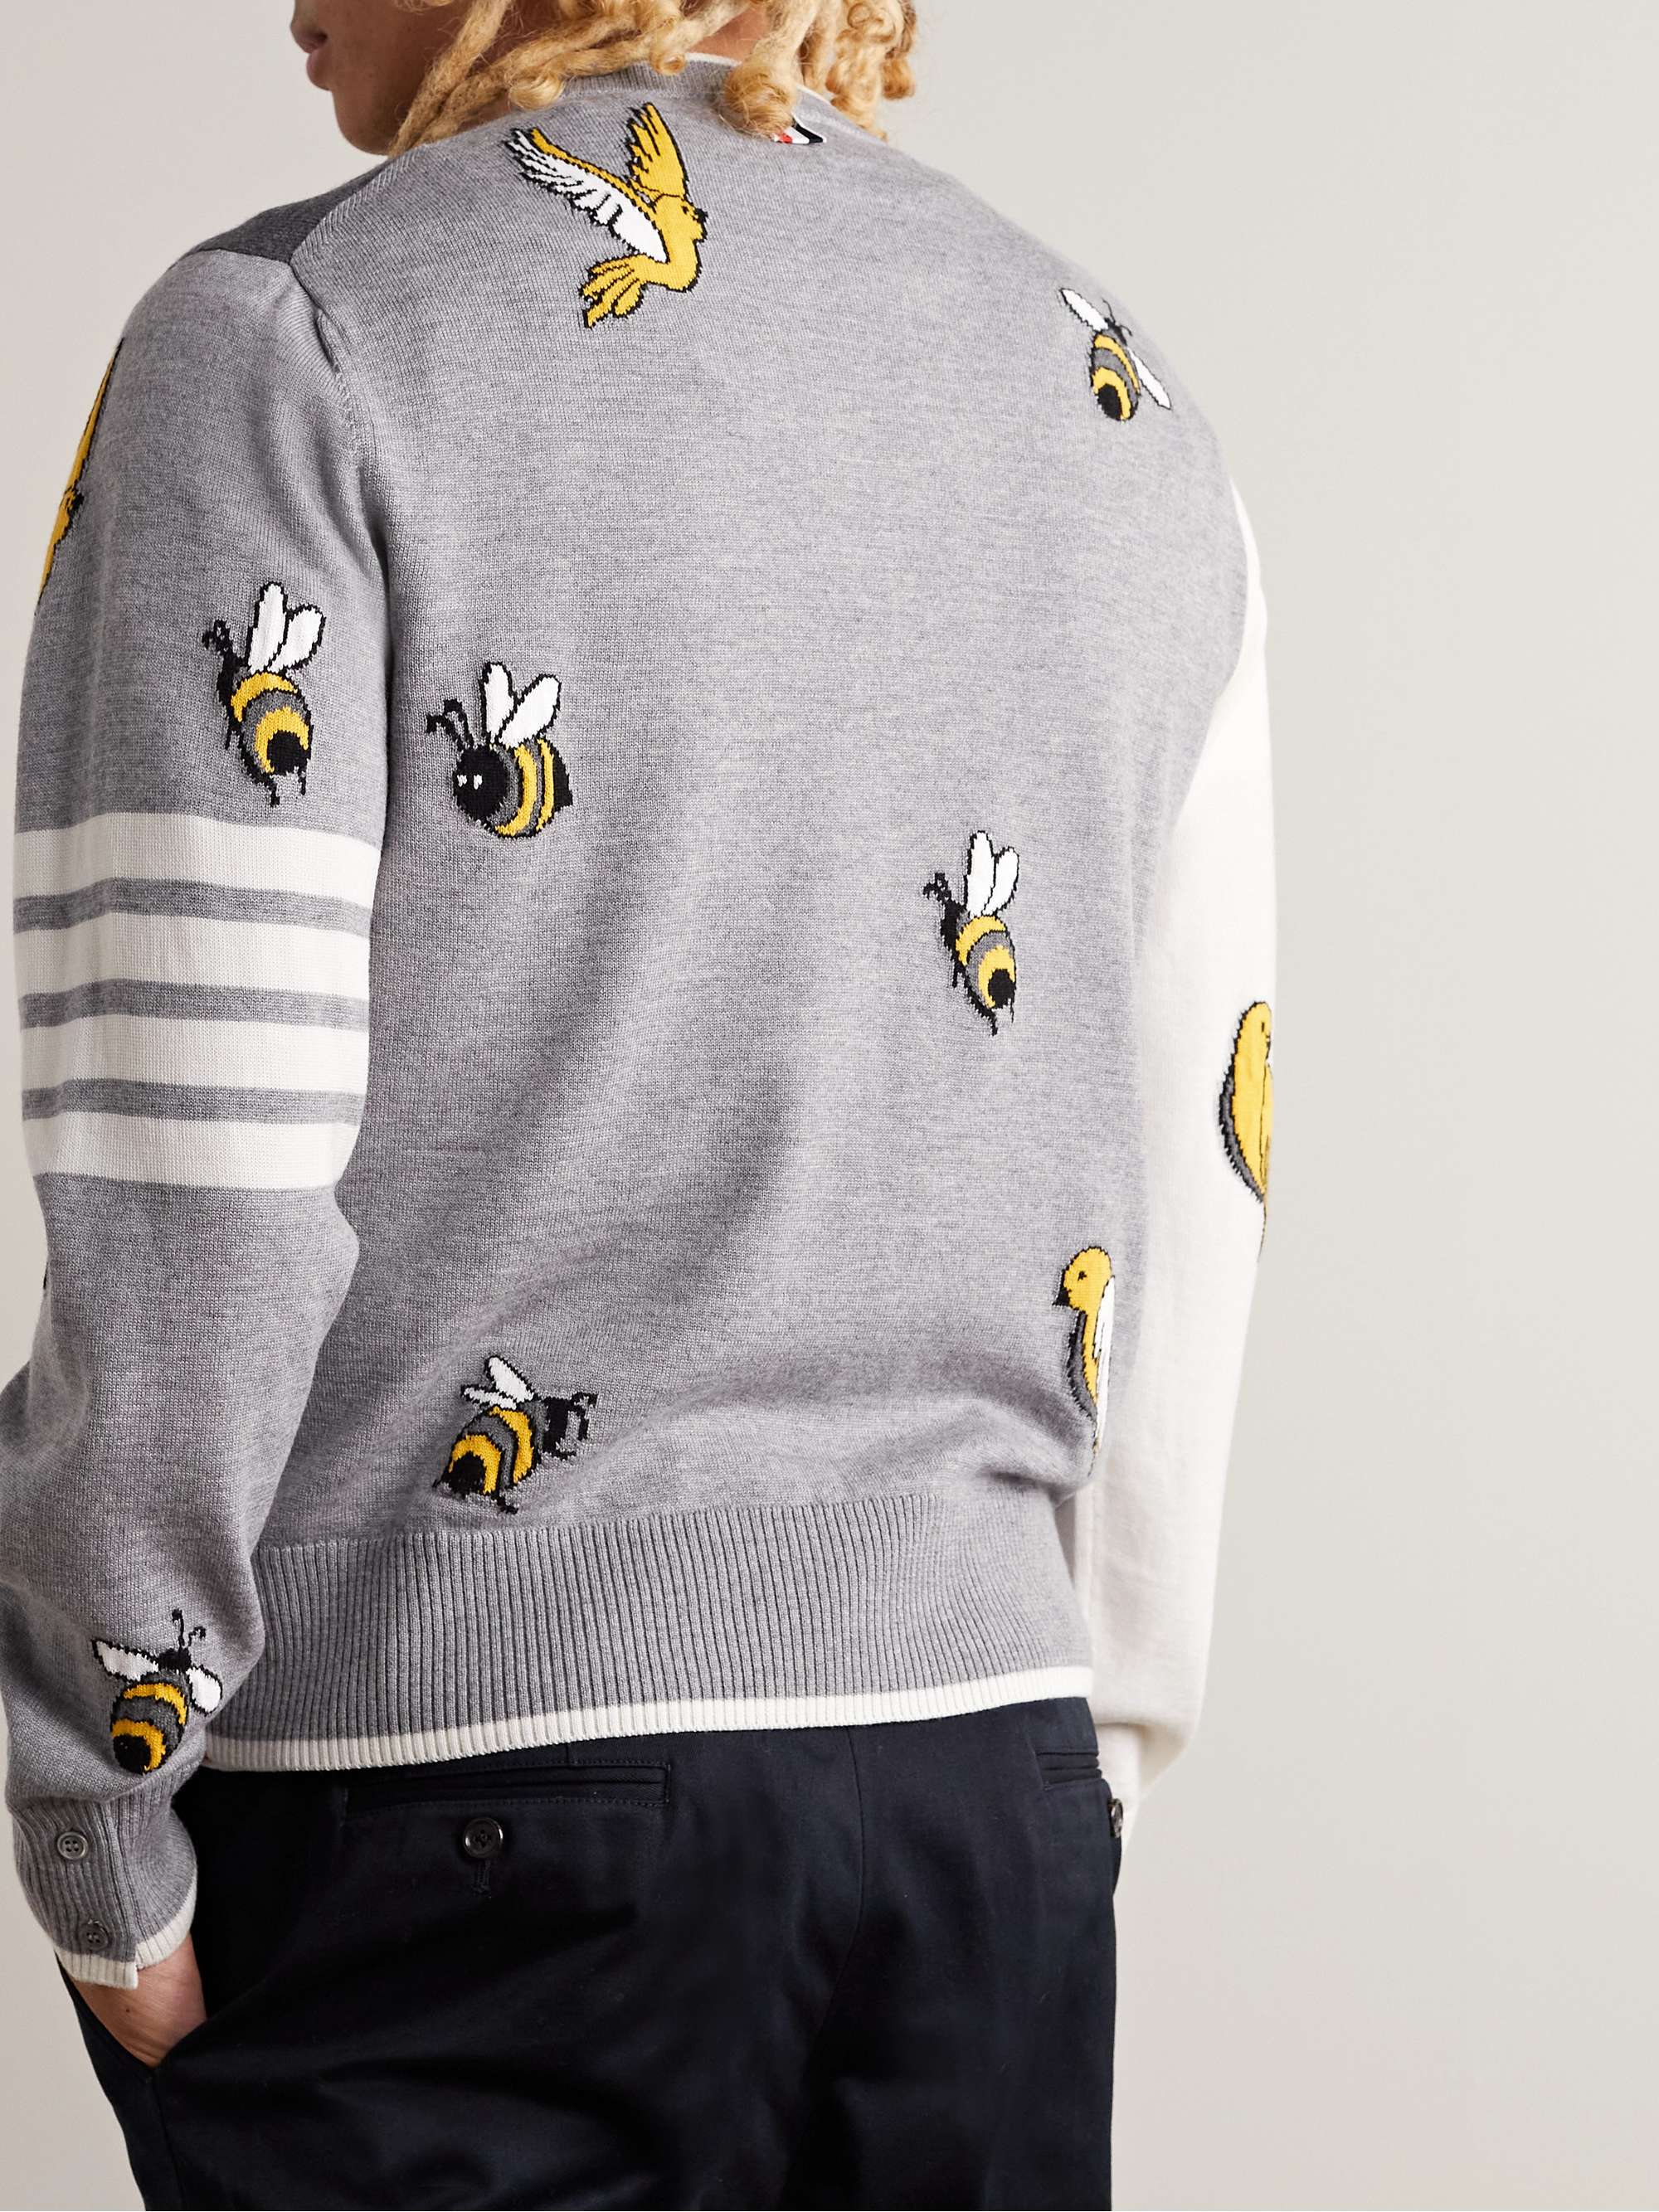 THOM BROWNE Intarsia Wool and Cotton-Blend Sweater